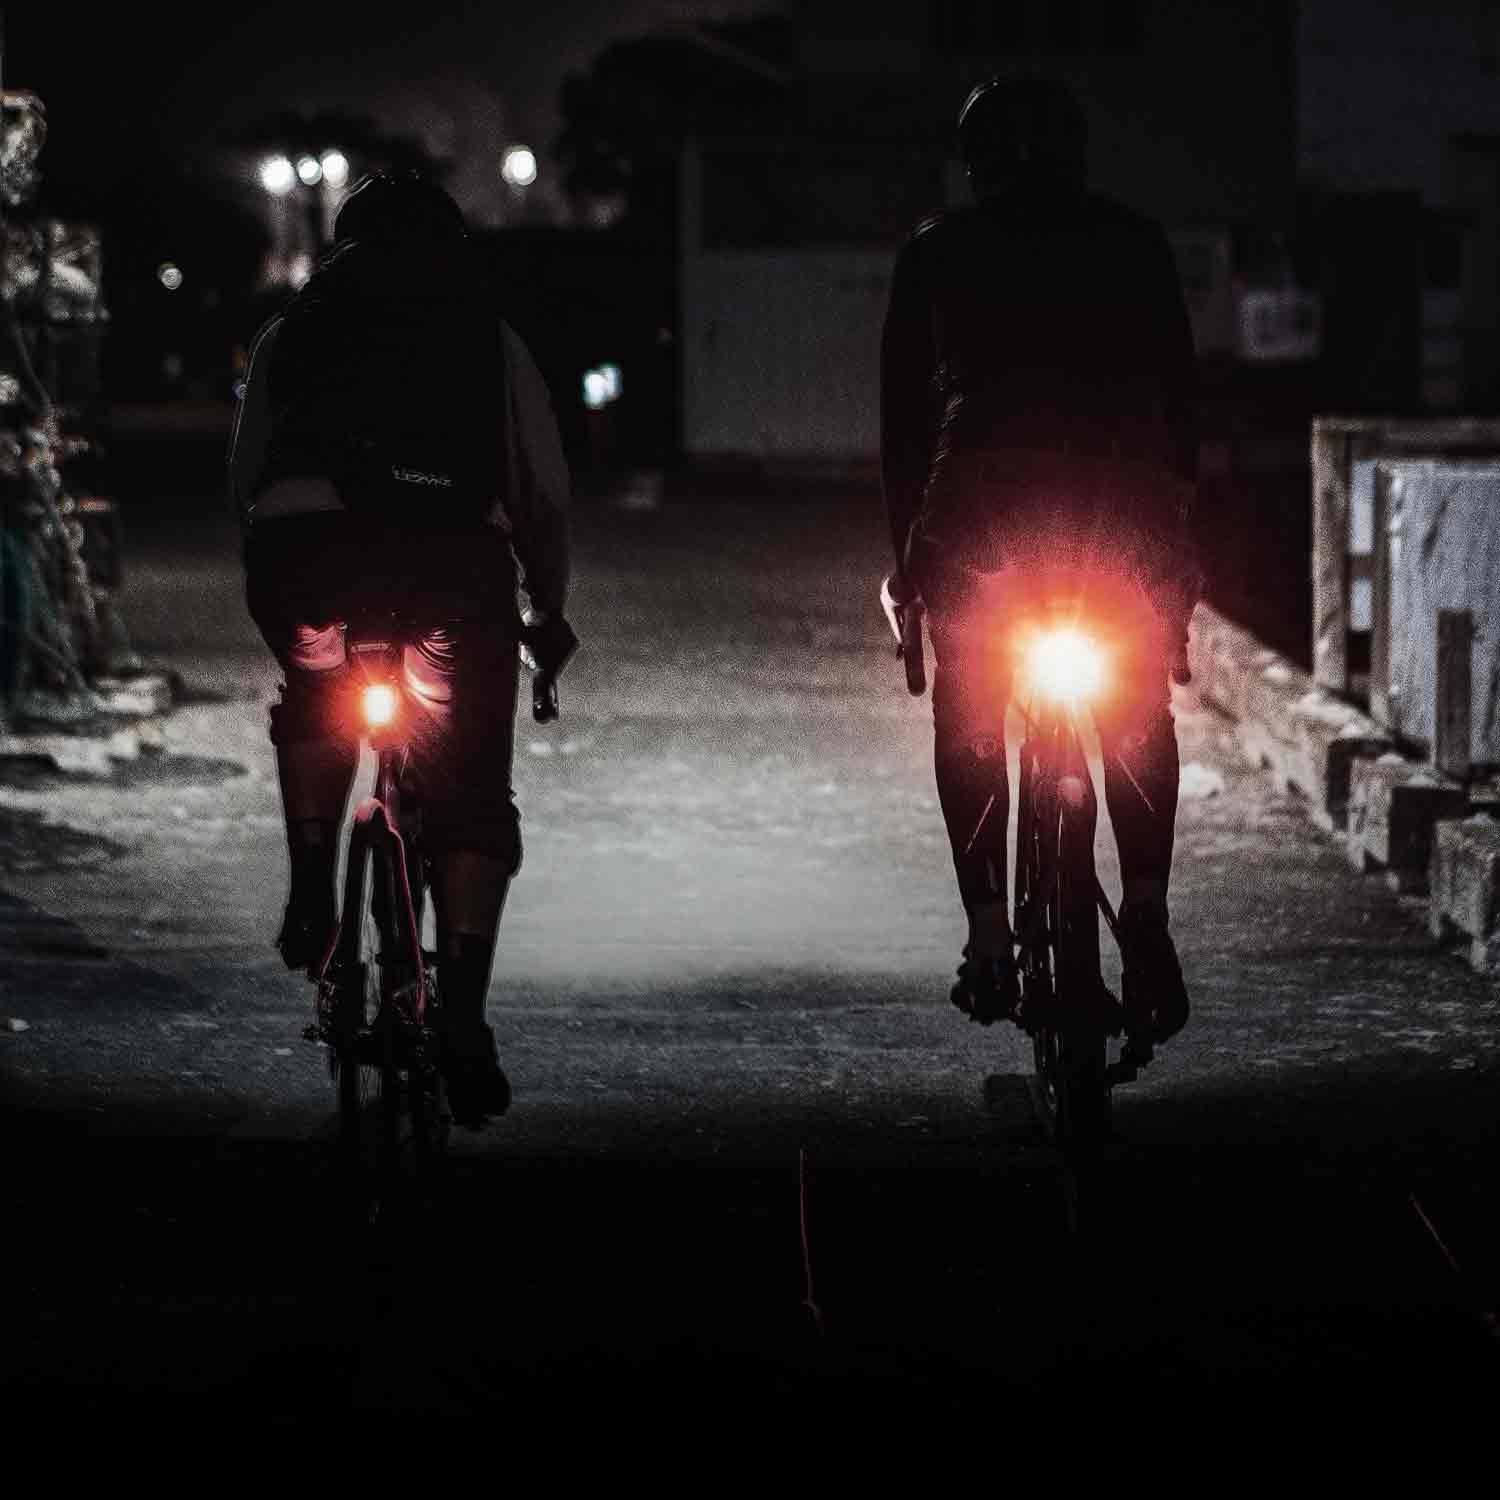 The back side of 2 people riding on a very dark road with bright red lights on the back of their bicycles and the road ahead illuminated.